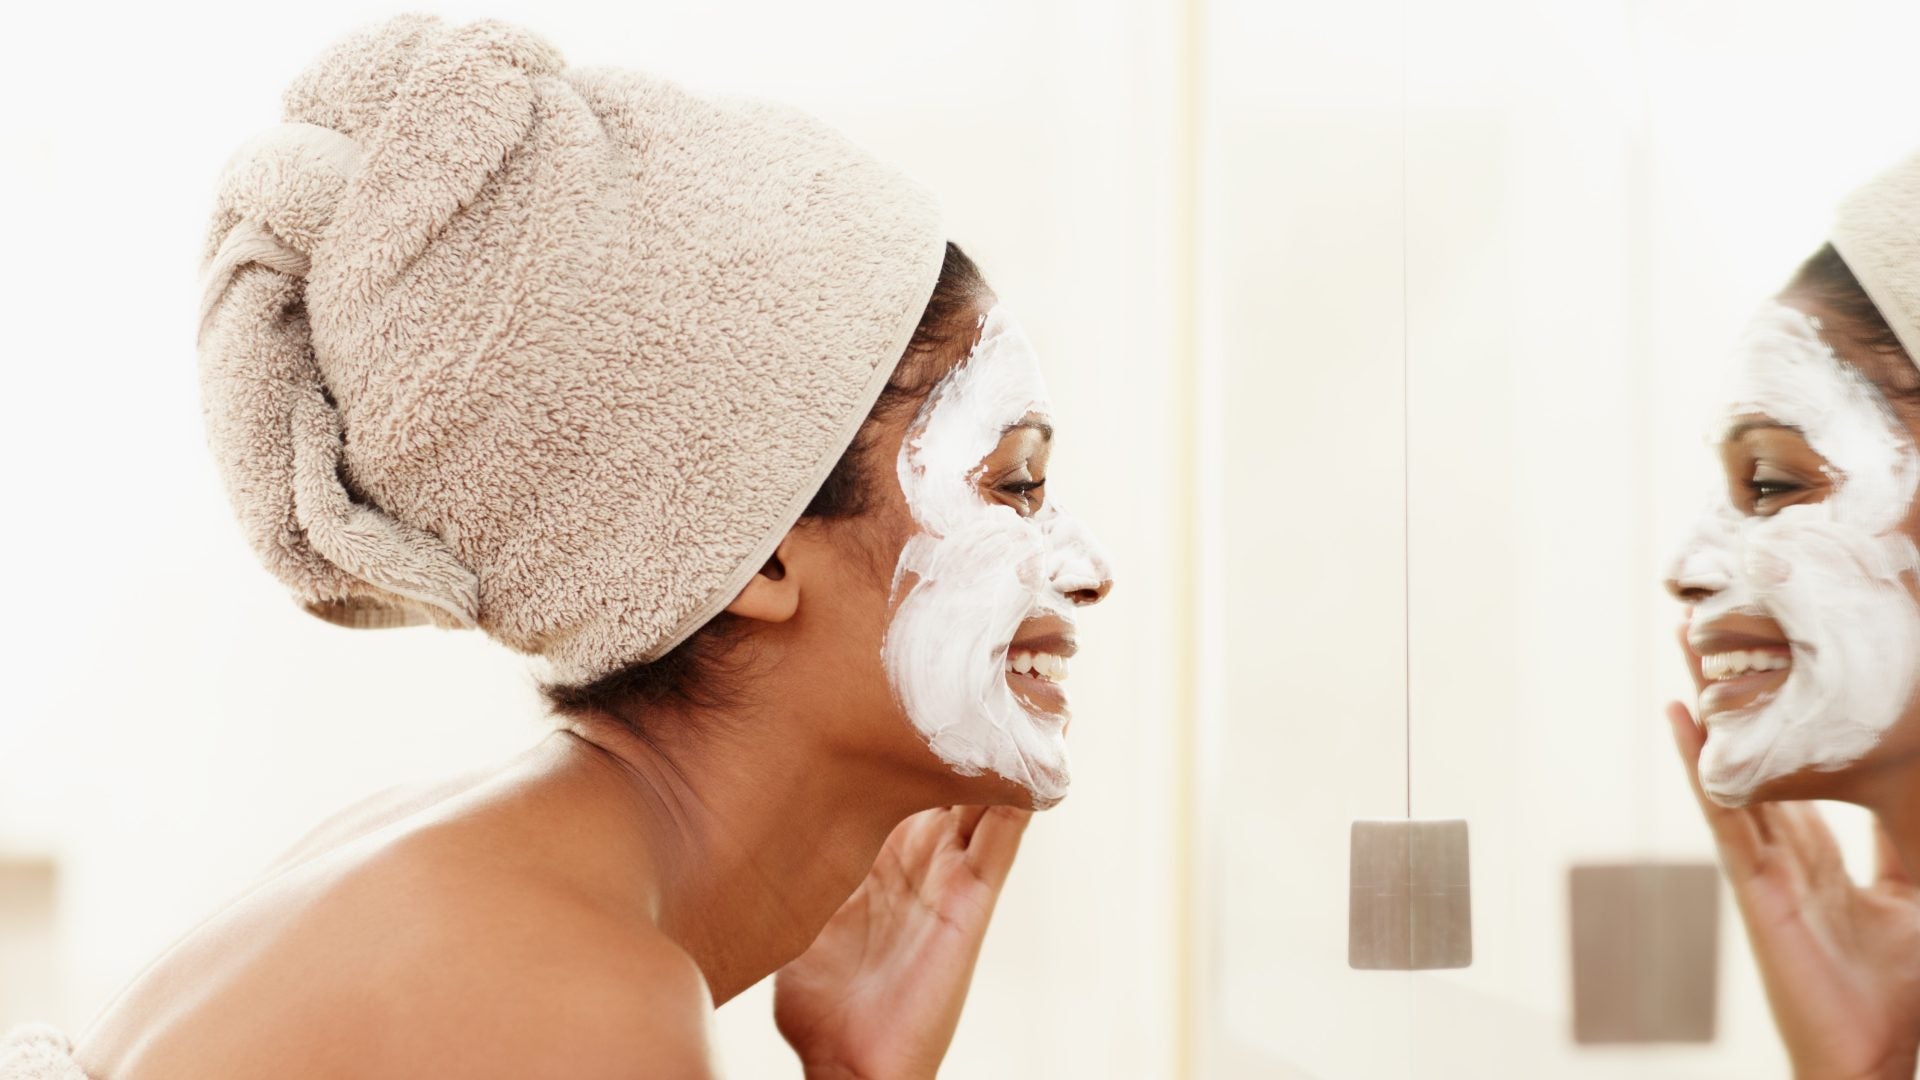 Want Clear, Glowy Skin? Here’s 7 Deep-Cleansing Face Masks That Will Make It Happen